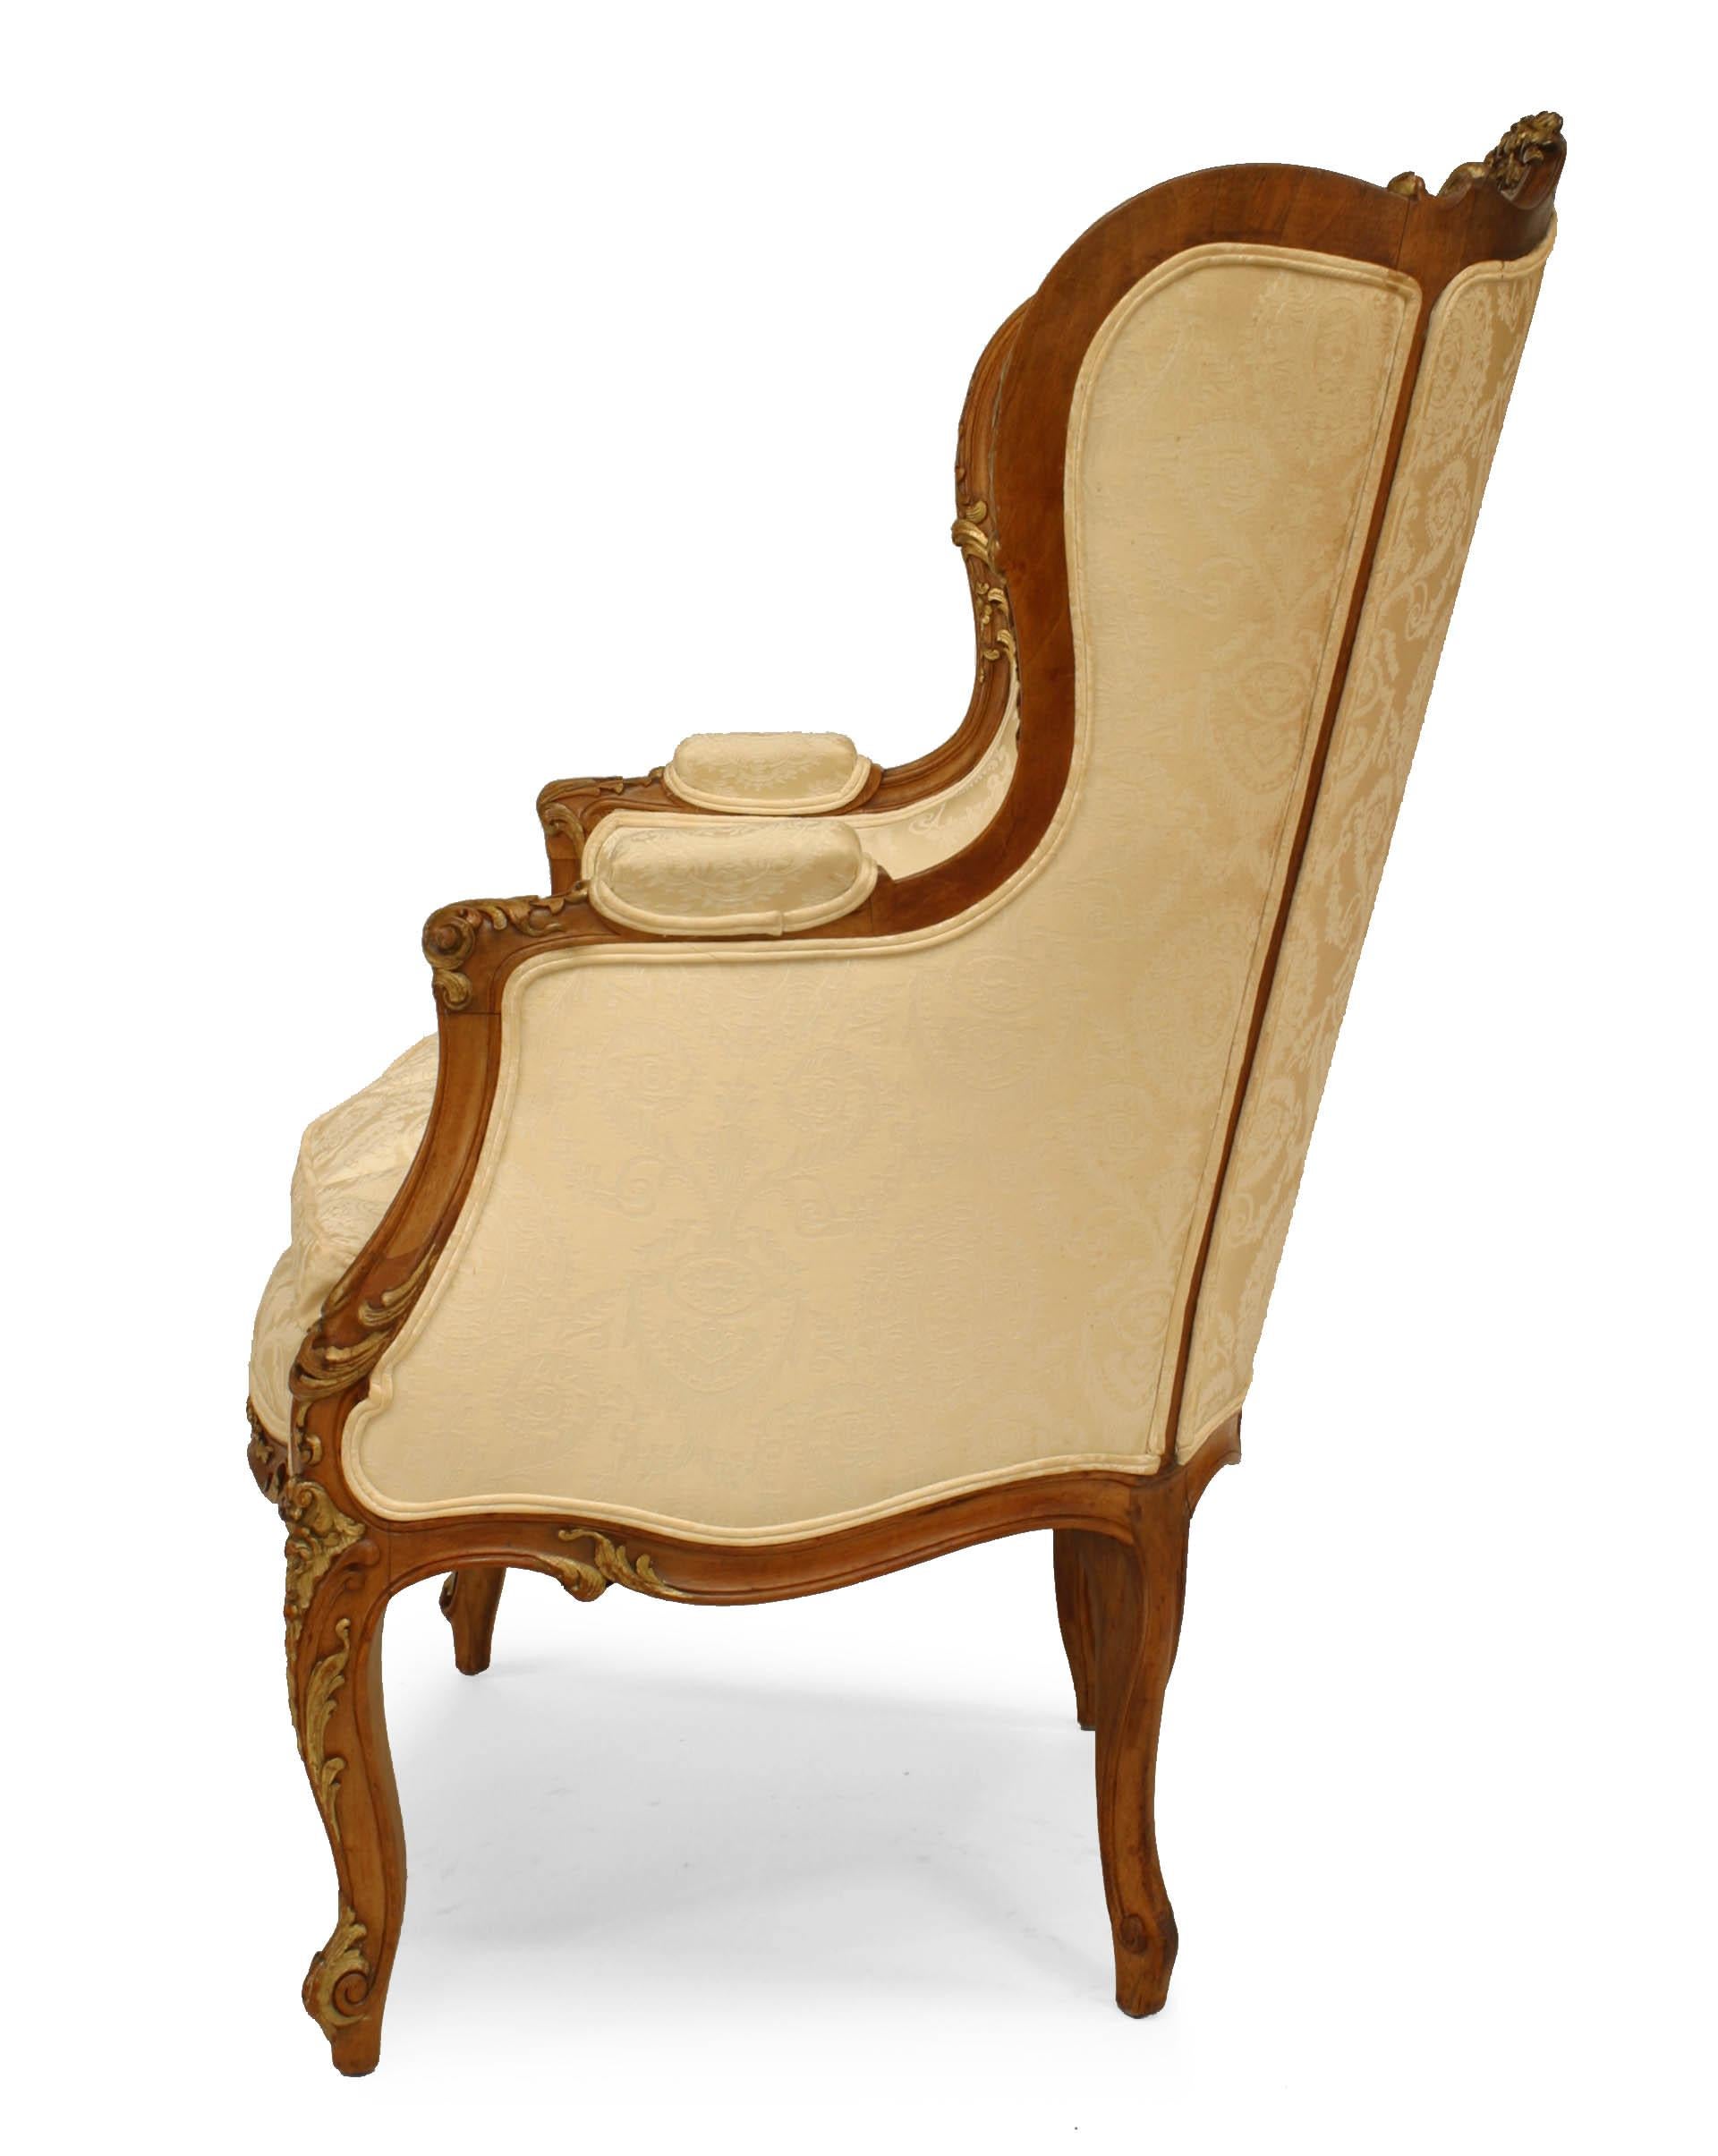 Late 19th early 20th century French Louis XV style walnut bergere arm chair with gilt trim, white upholstery, and wing back.